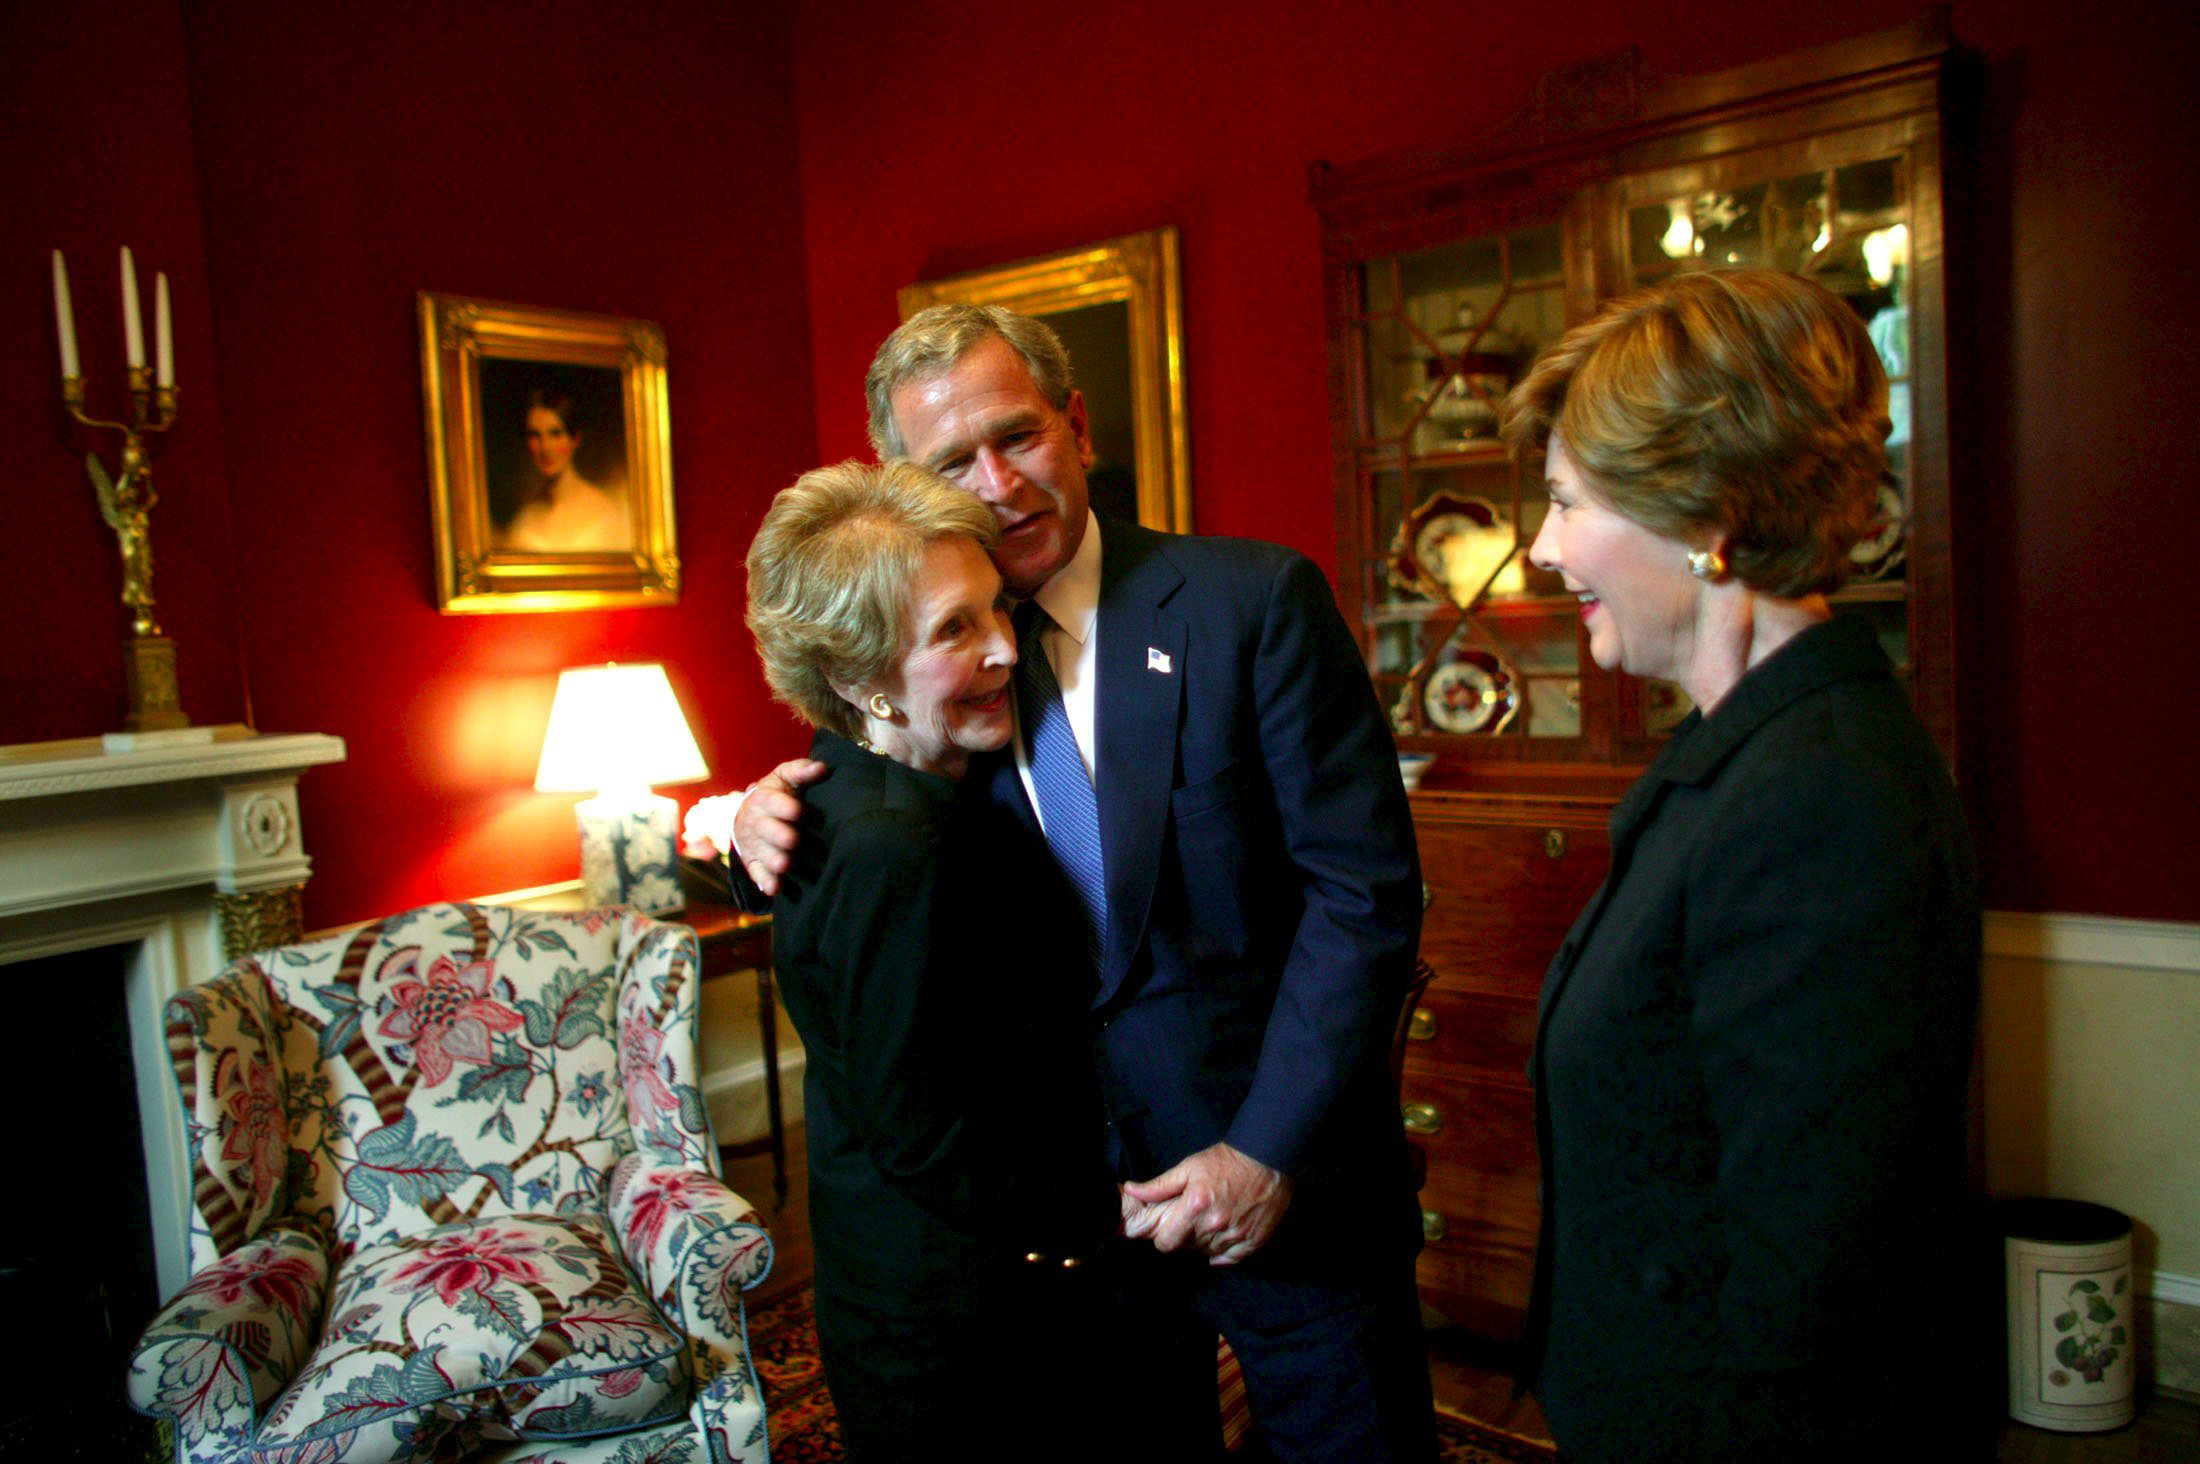 Former President George W. Bush and former first lady Laura Bush greet former first lady Nancy Reagan at Blair House in Washington on June 10, 2004.